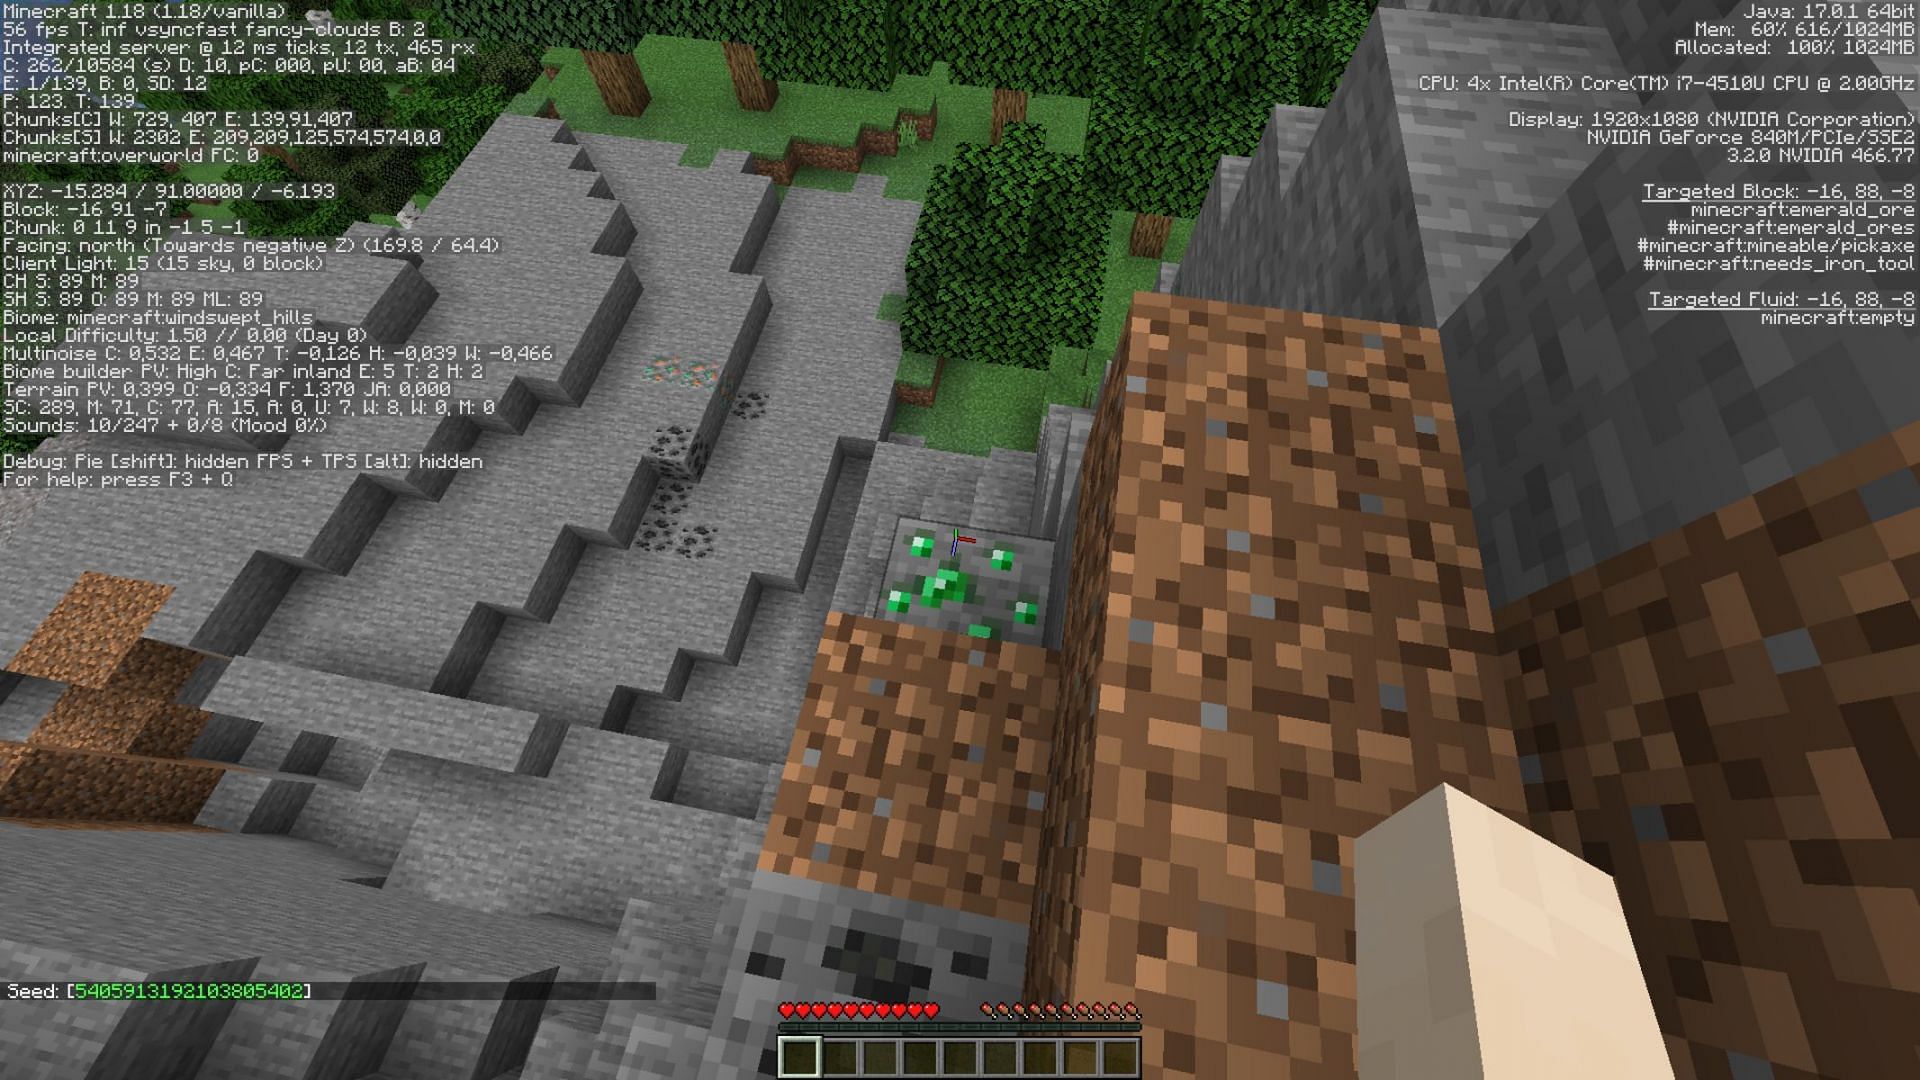 Surface ores are easier to spot with spyglasses (Image via PlayMax/Minecraftforum.net)